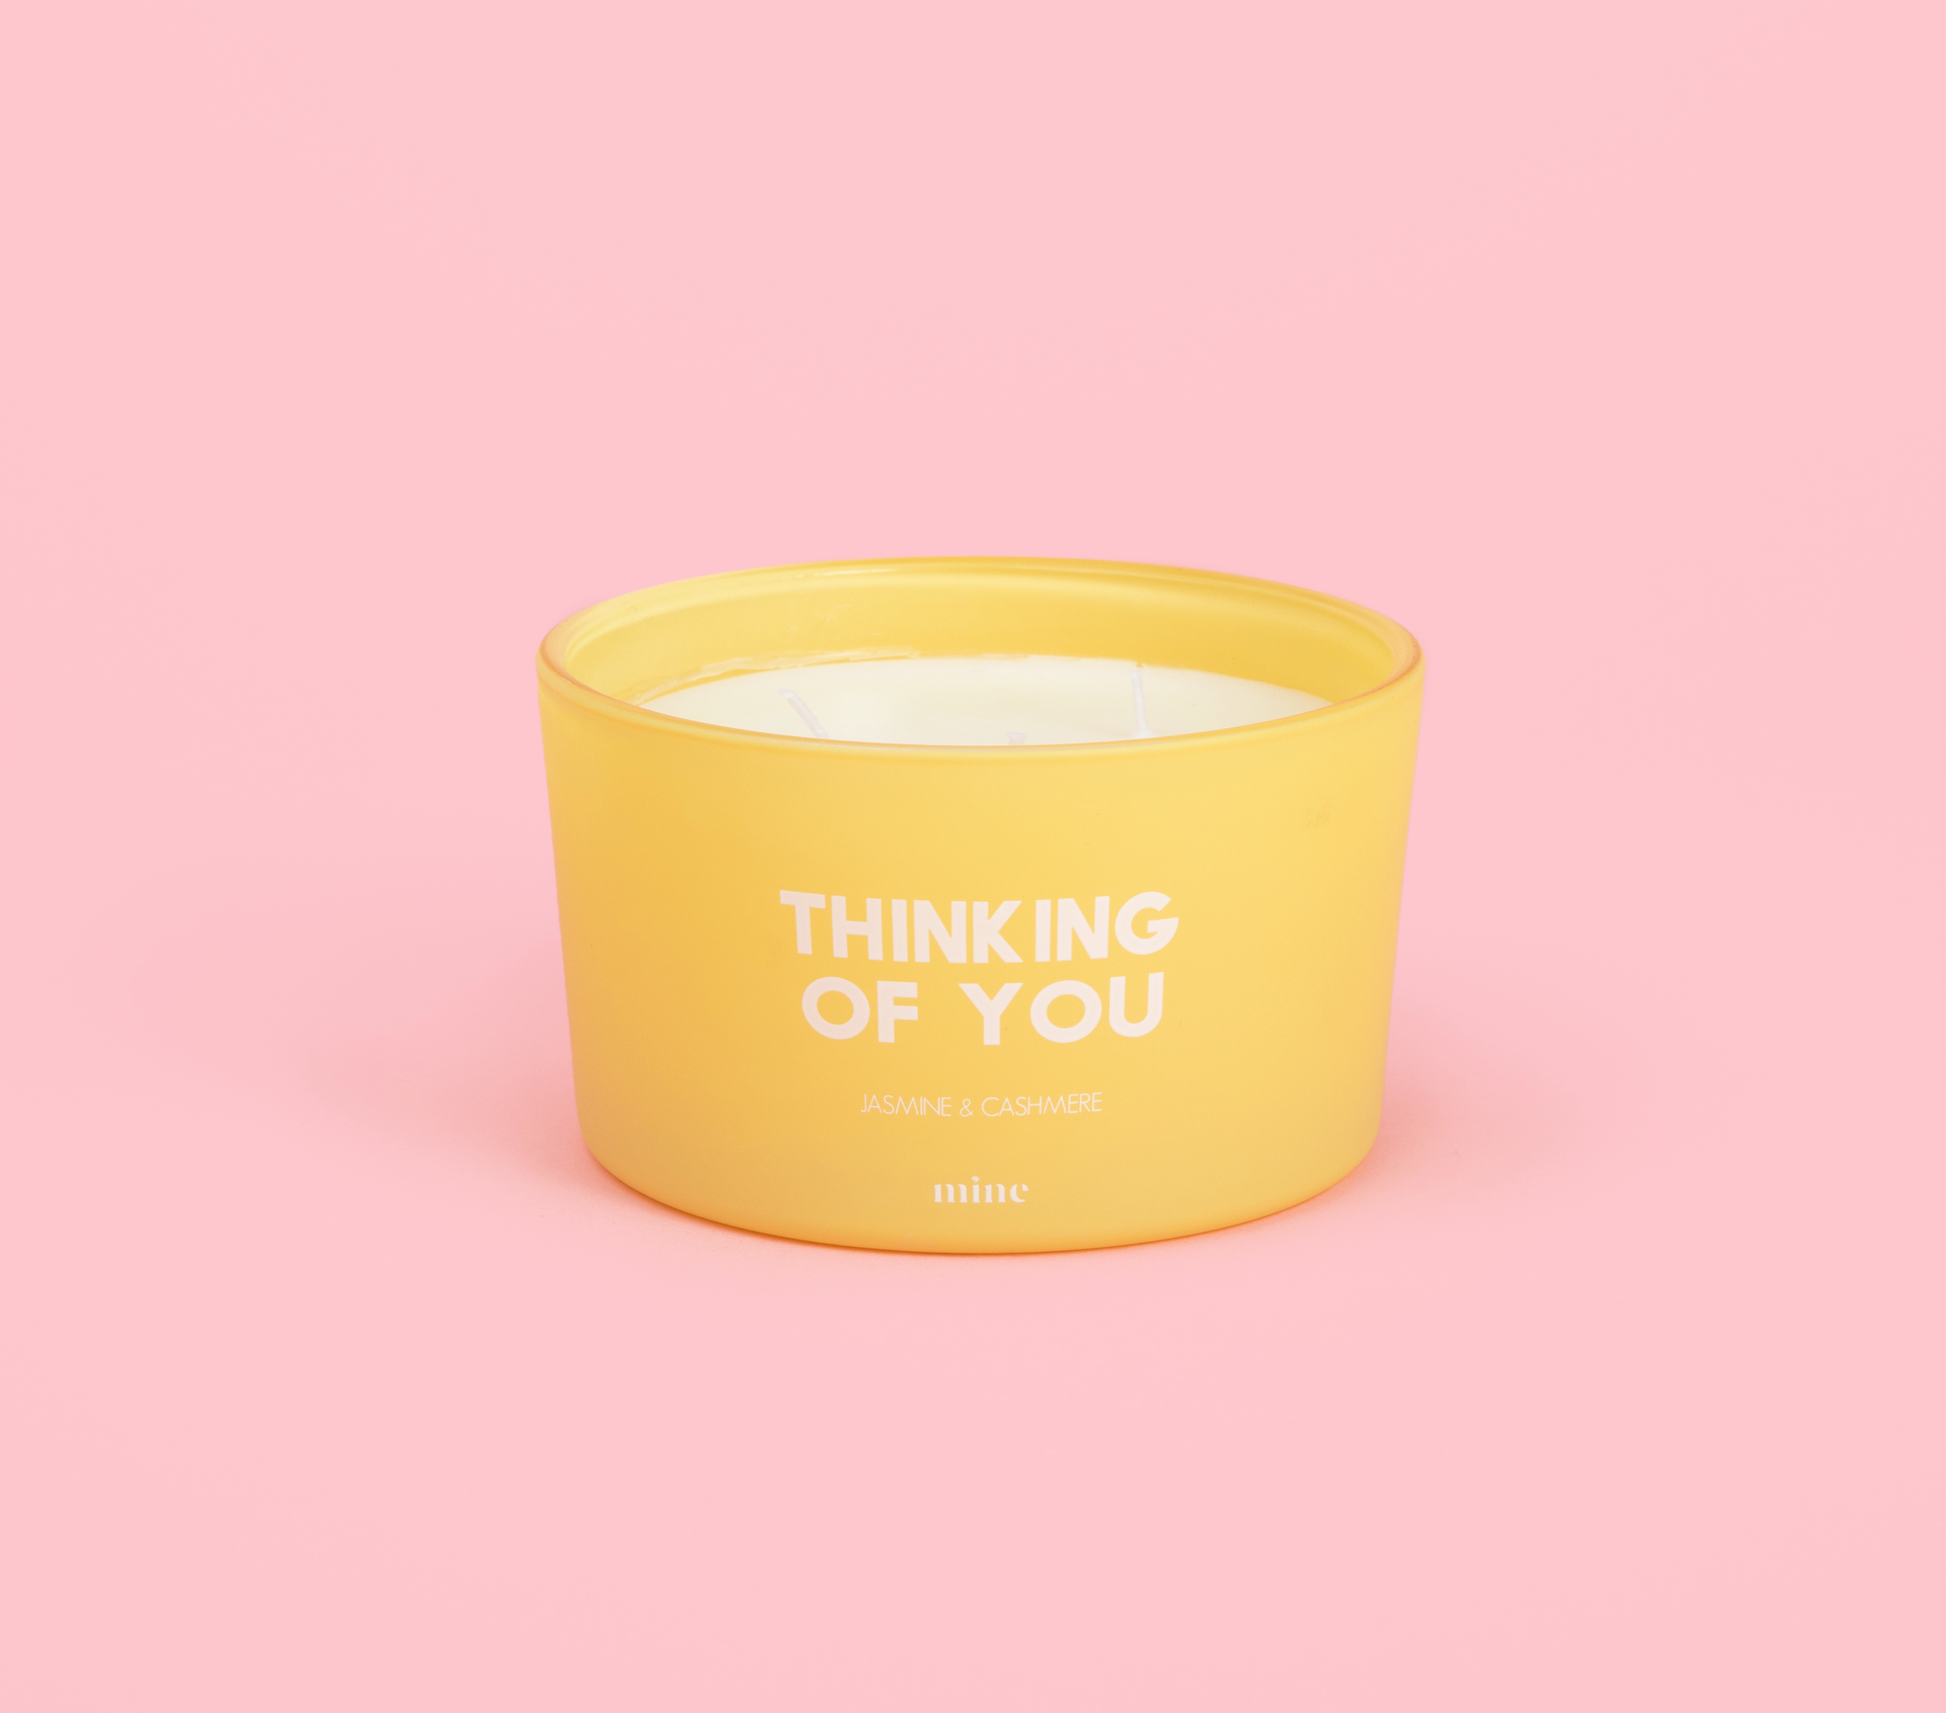 yellow round circular candle that says Thinking of You on pink background